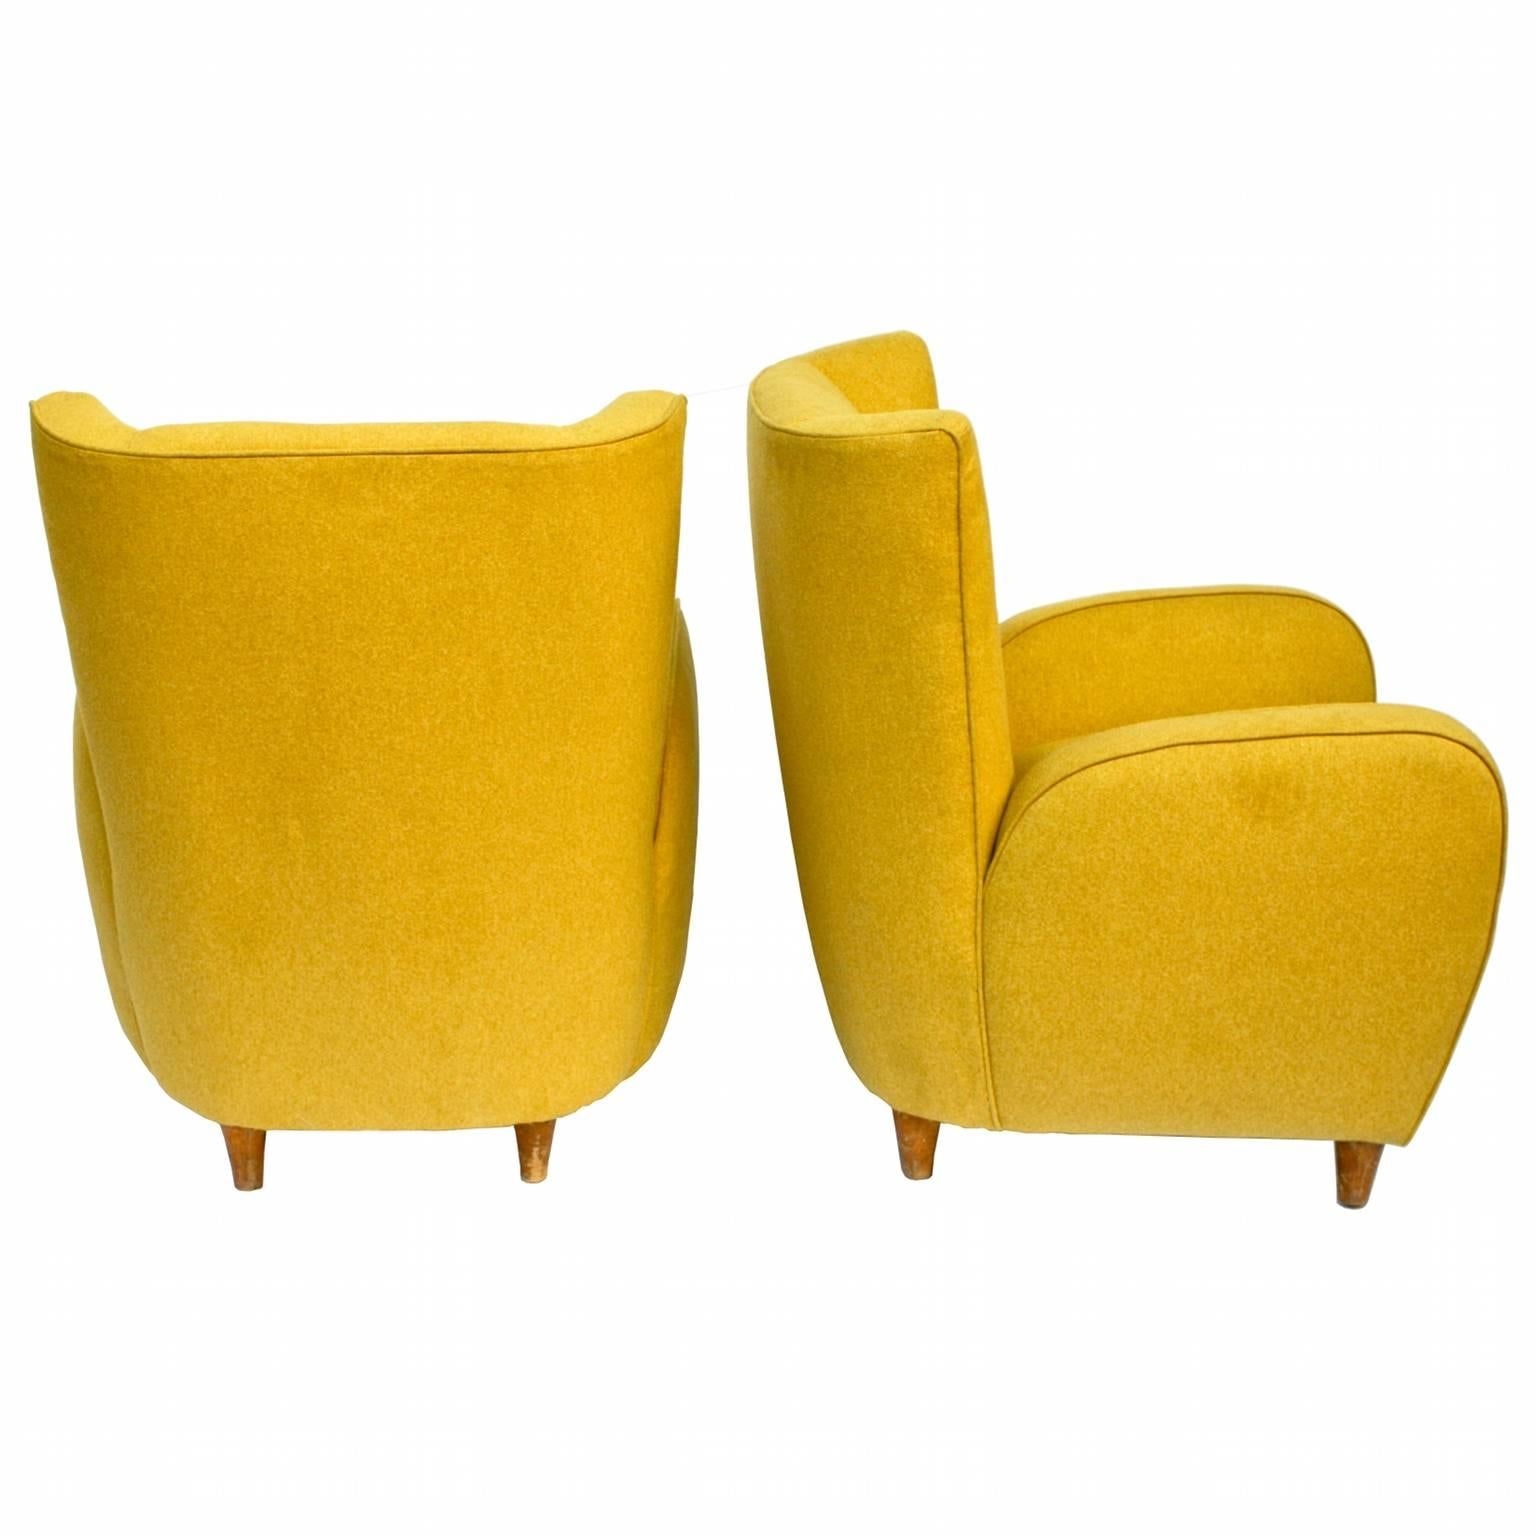 Pair of armchairs covered in fabric, wooden structure. Reupholstered and relined. From hotel Bristol of Merano, Italy, circa 1950.